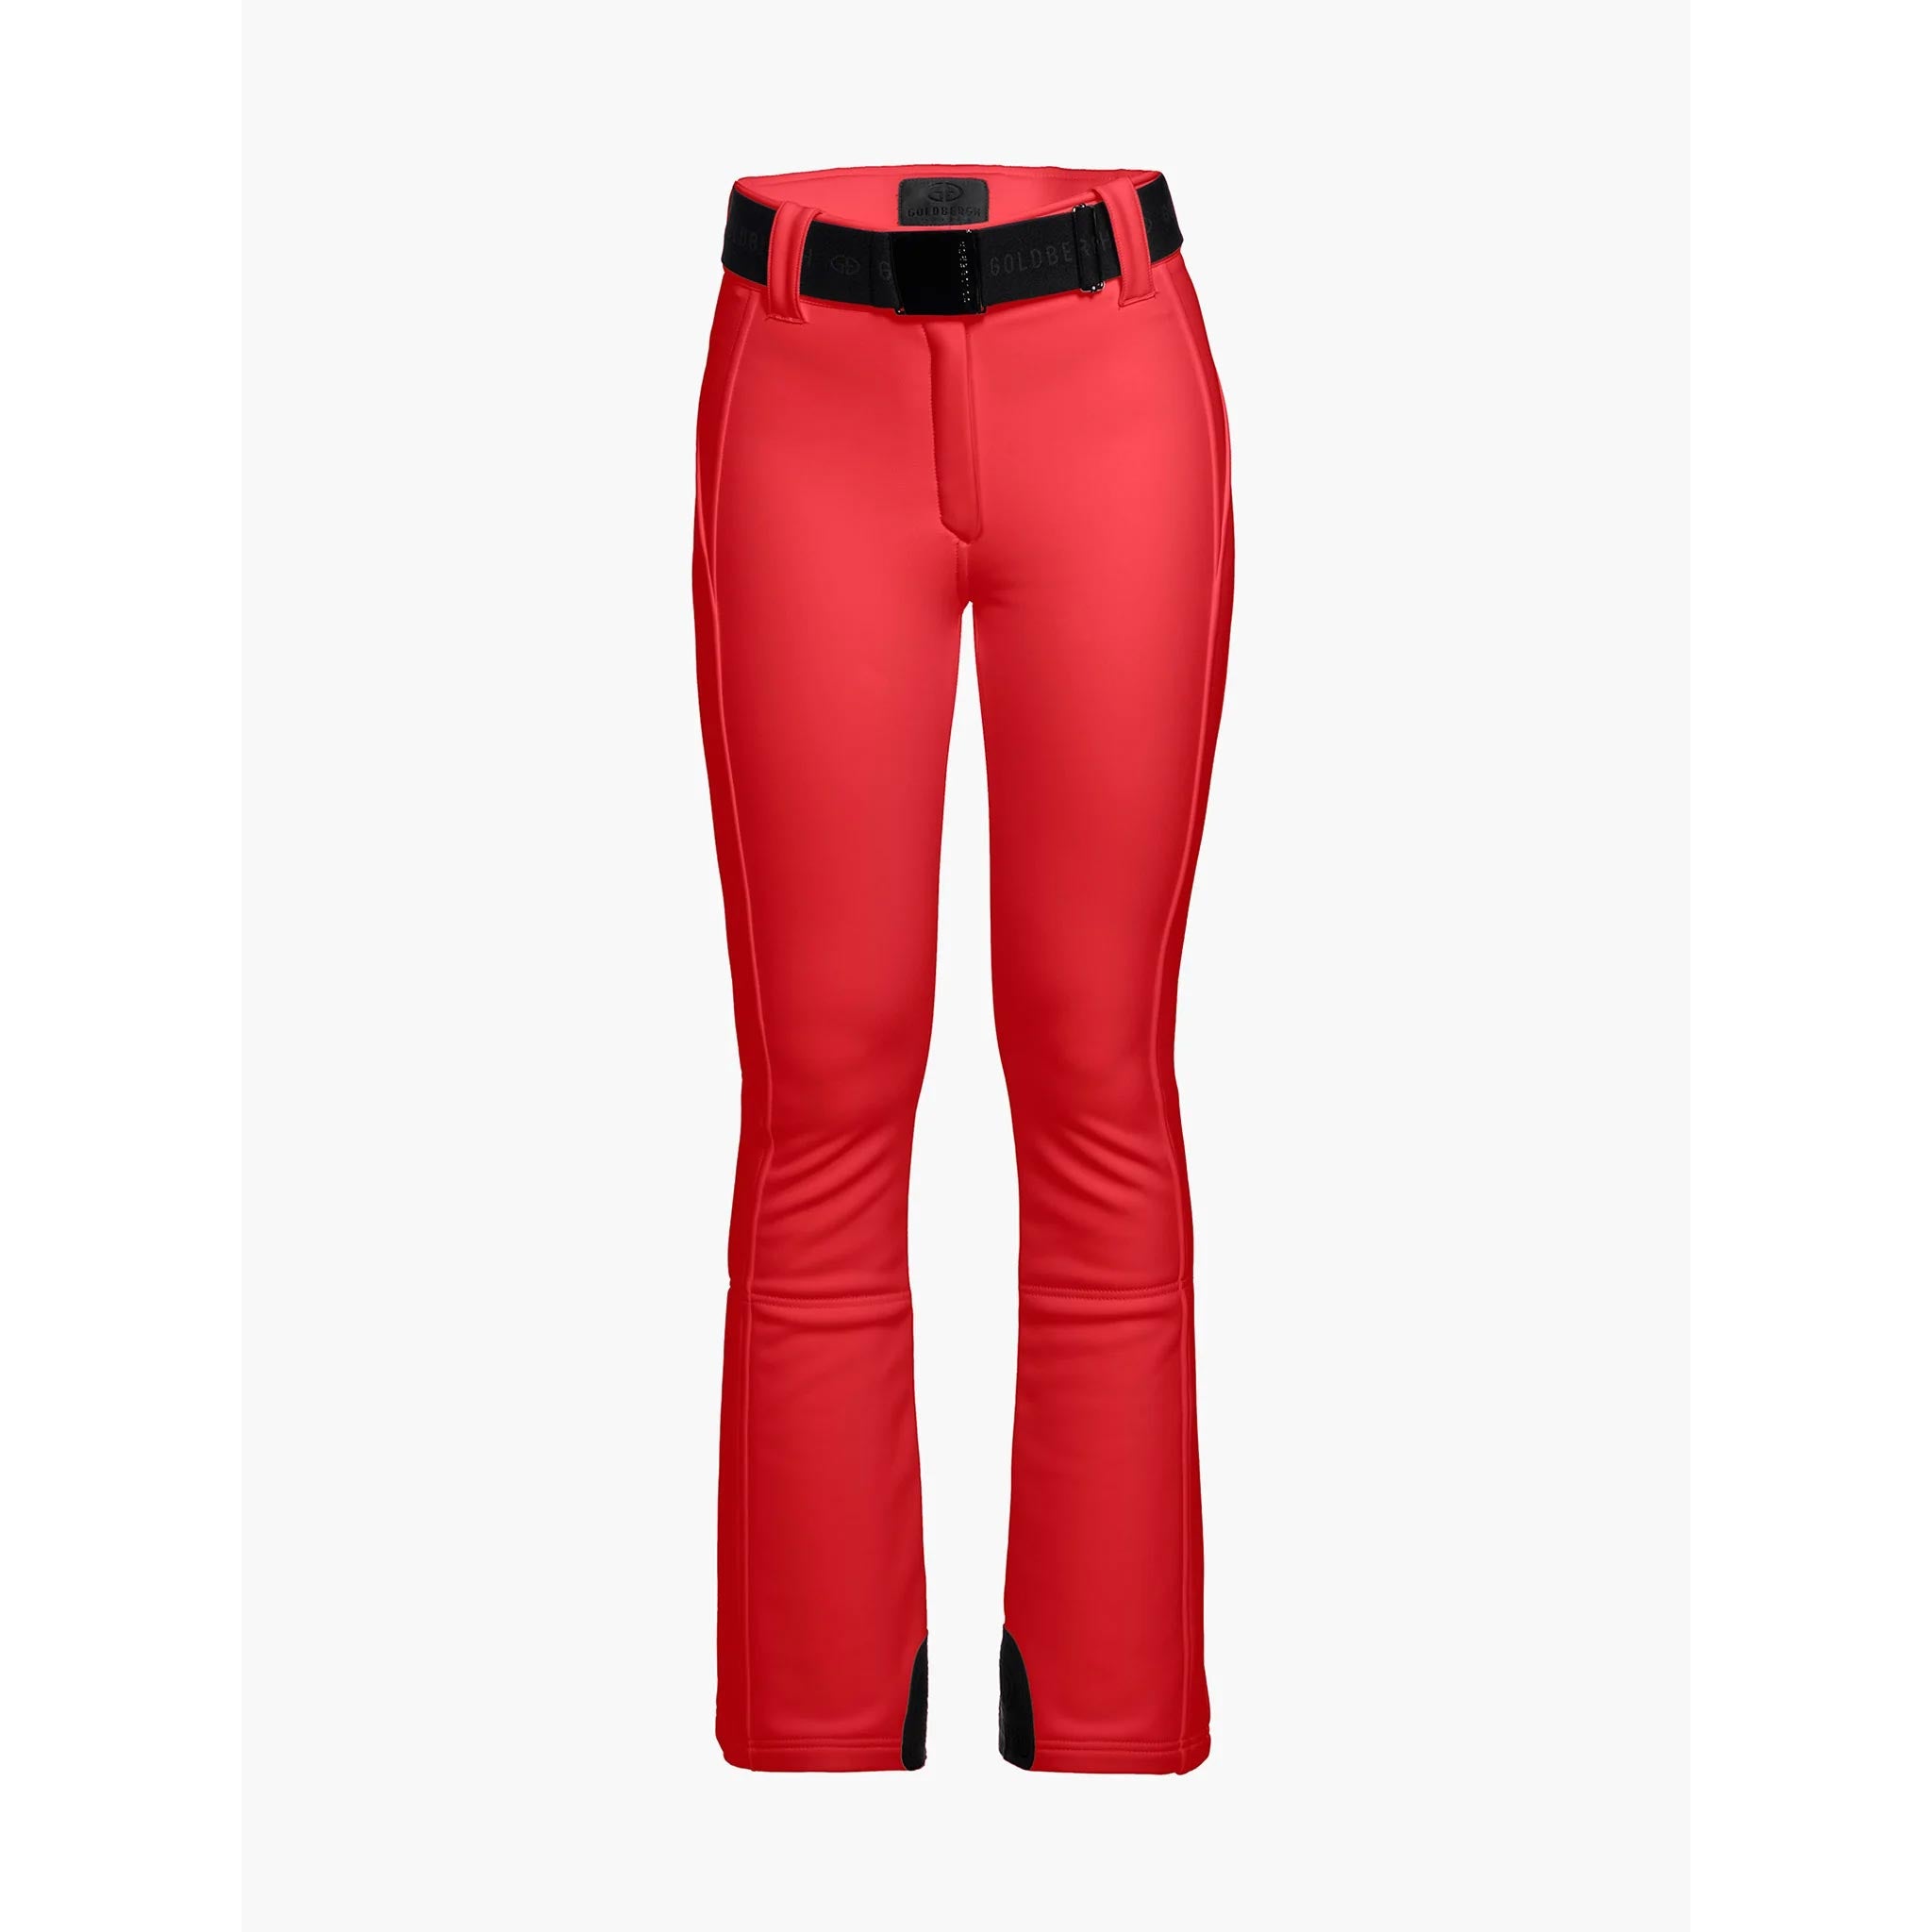 Pippa Ski Pants in Flame Red